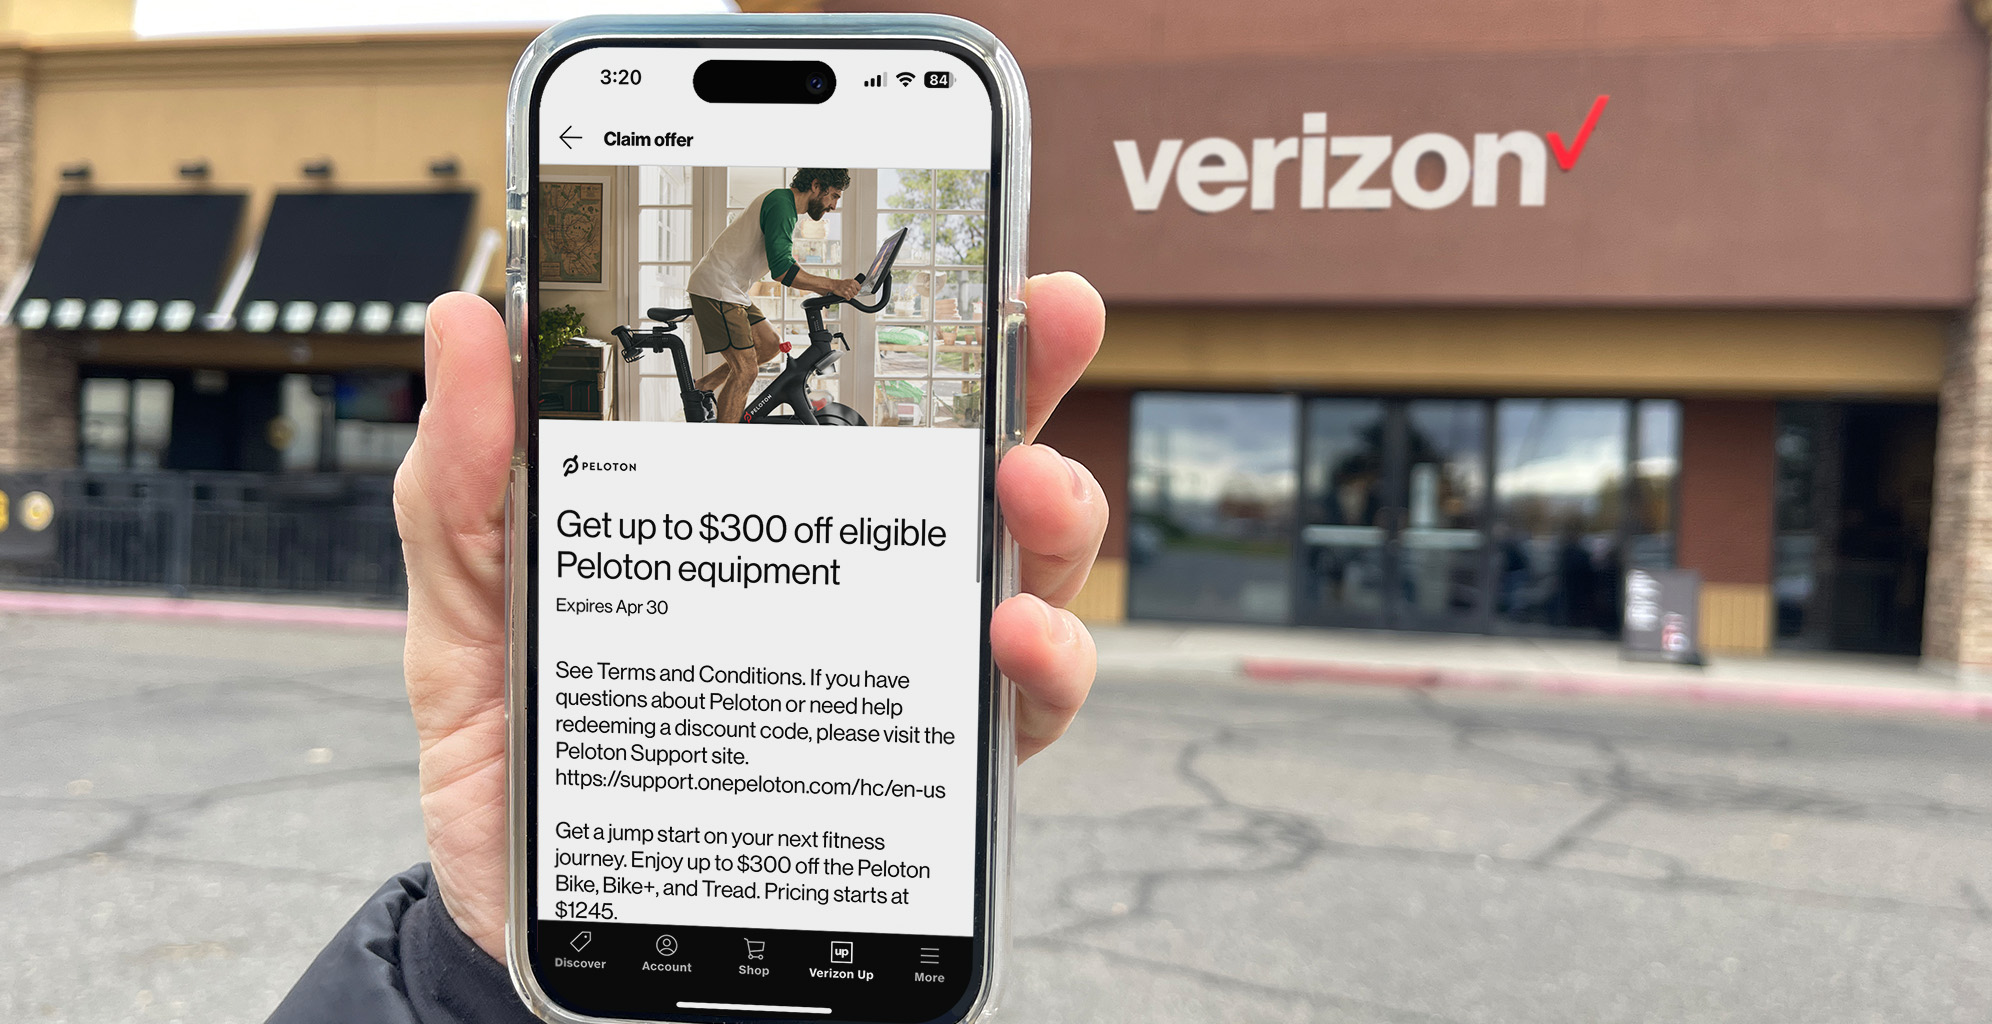 4. Understanding Verizon Up points and how to earn them.